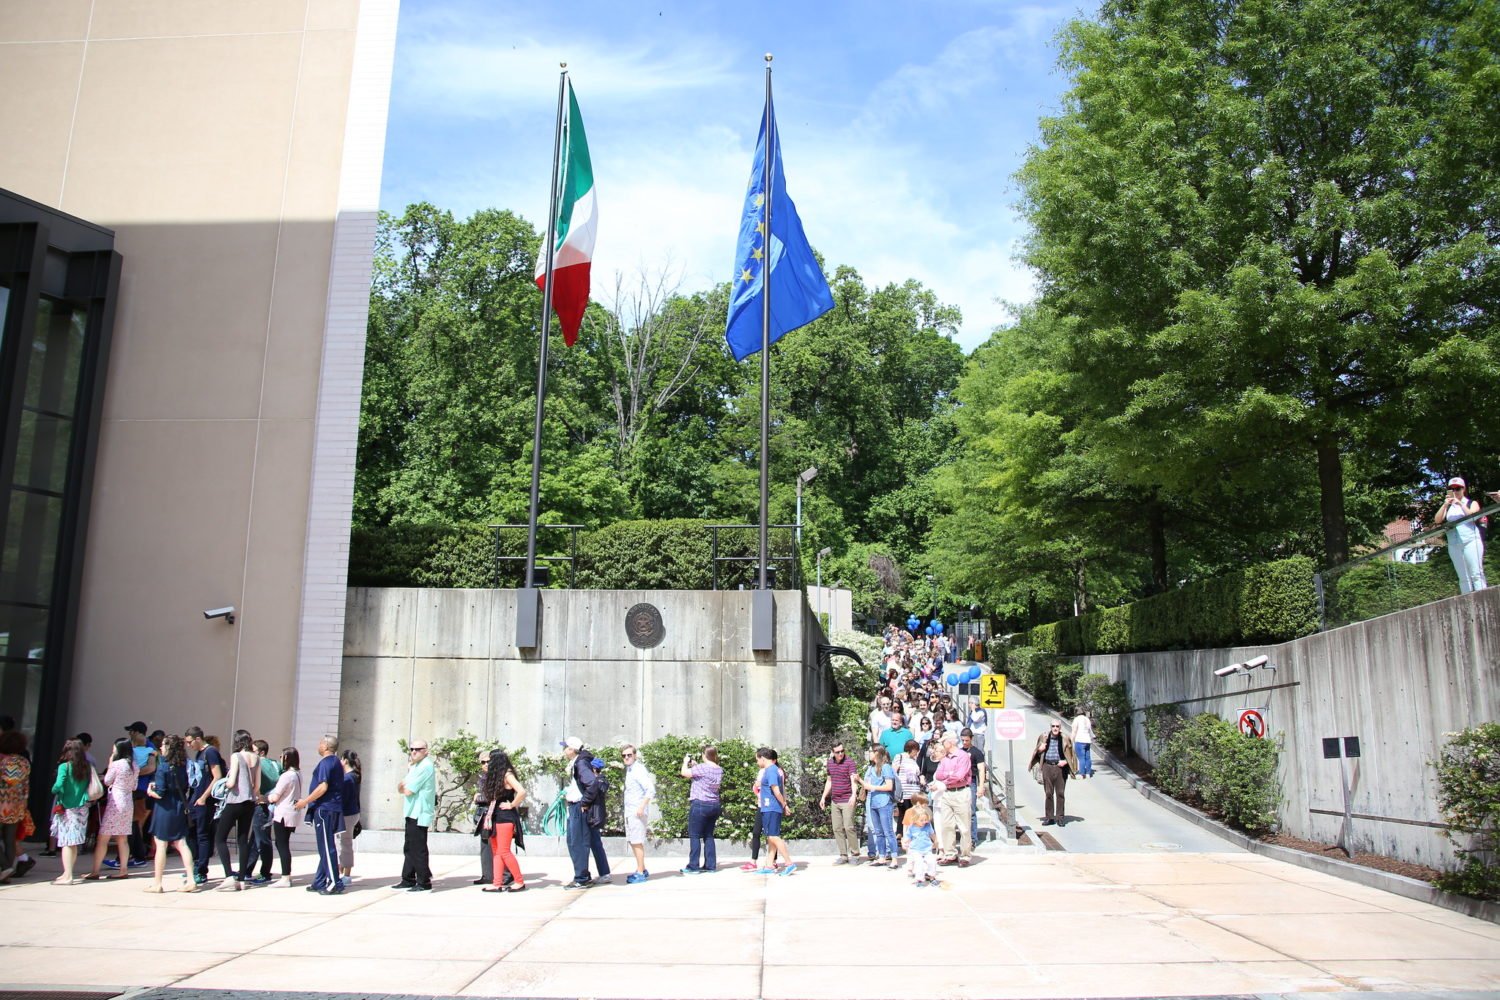 Tour More Embassies at the European Union Open House This Weekend